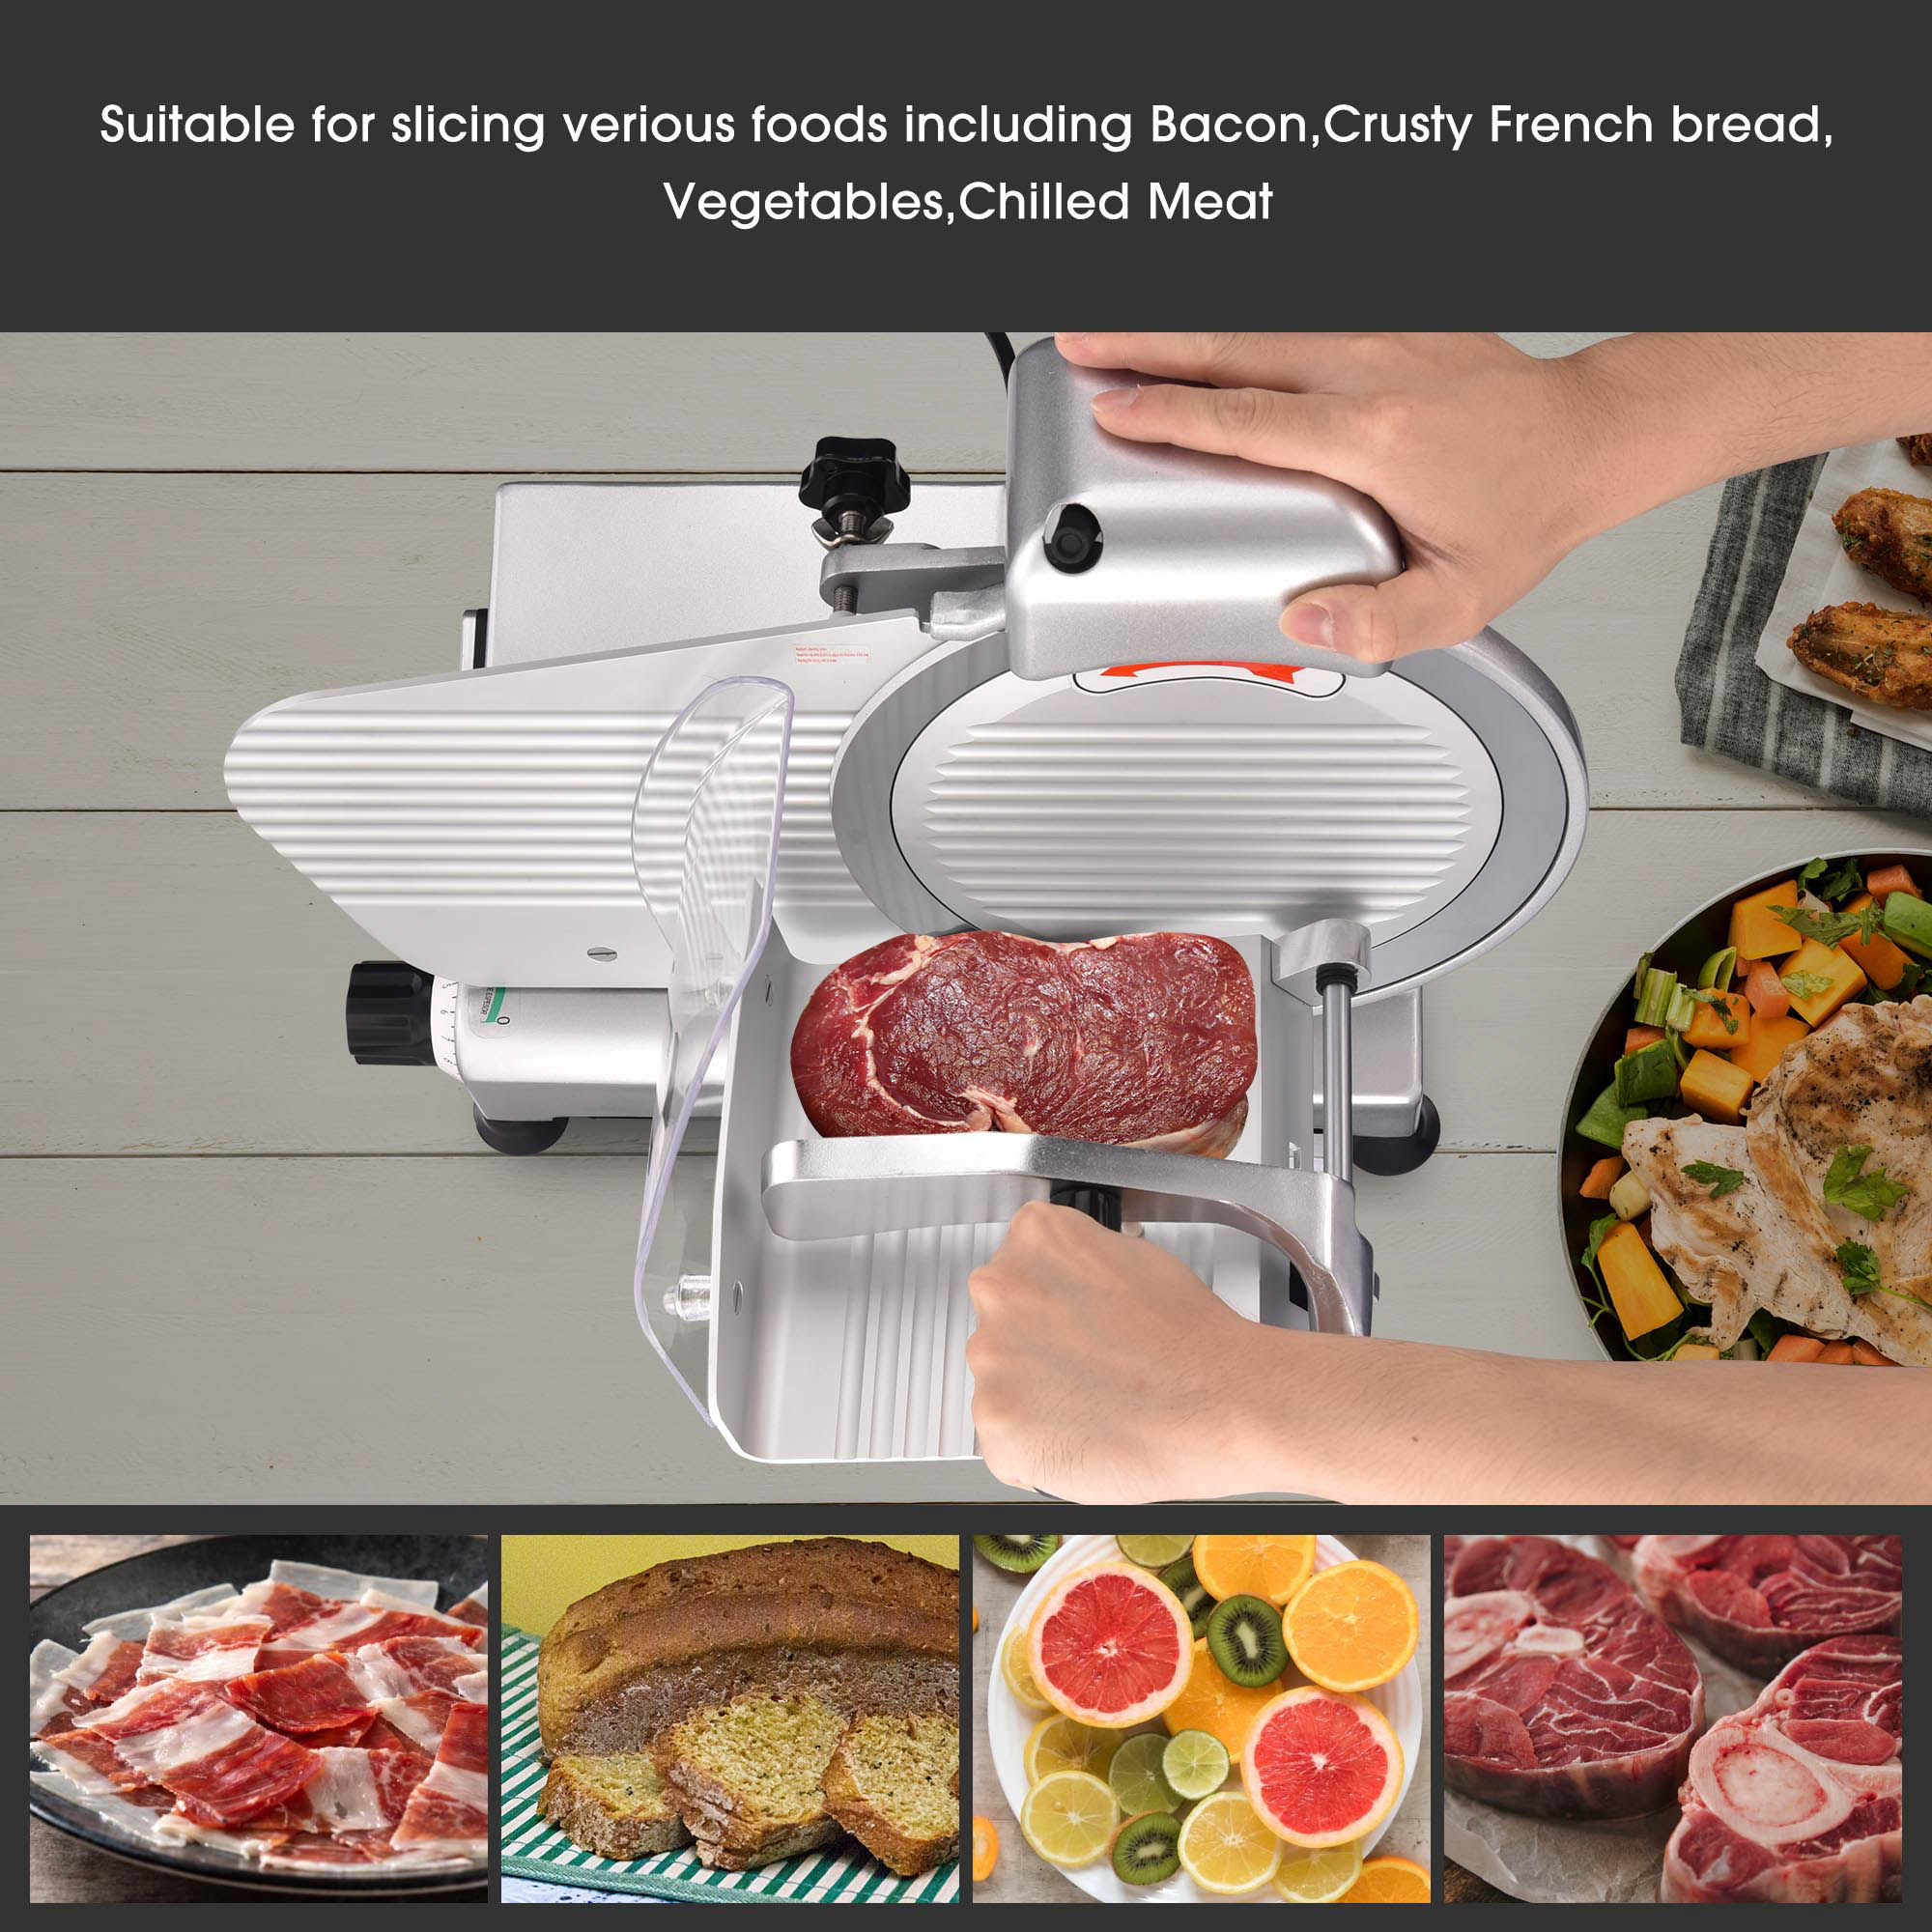 Yescom 10" Blade Commercial Meat Slicer Deli Food Cheese Veggies Kitchen Restaurant 240w 530RPM